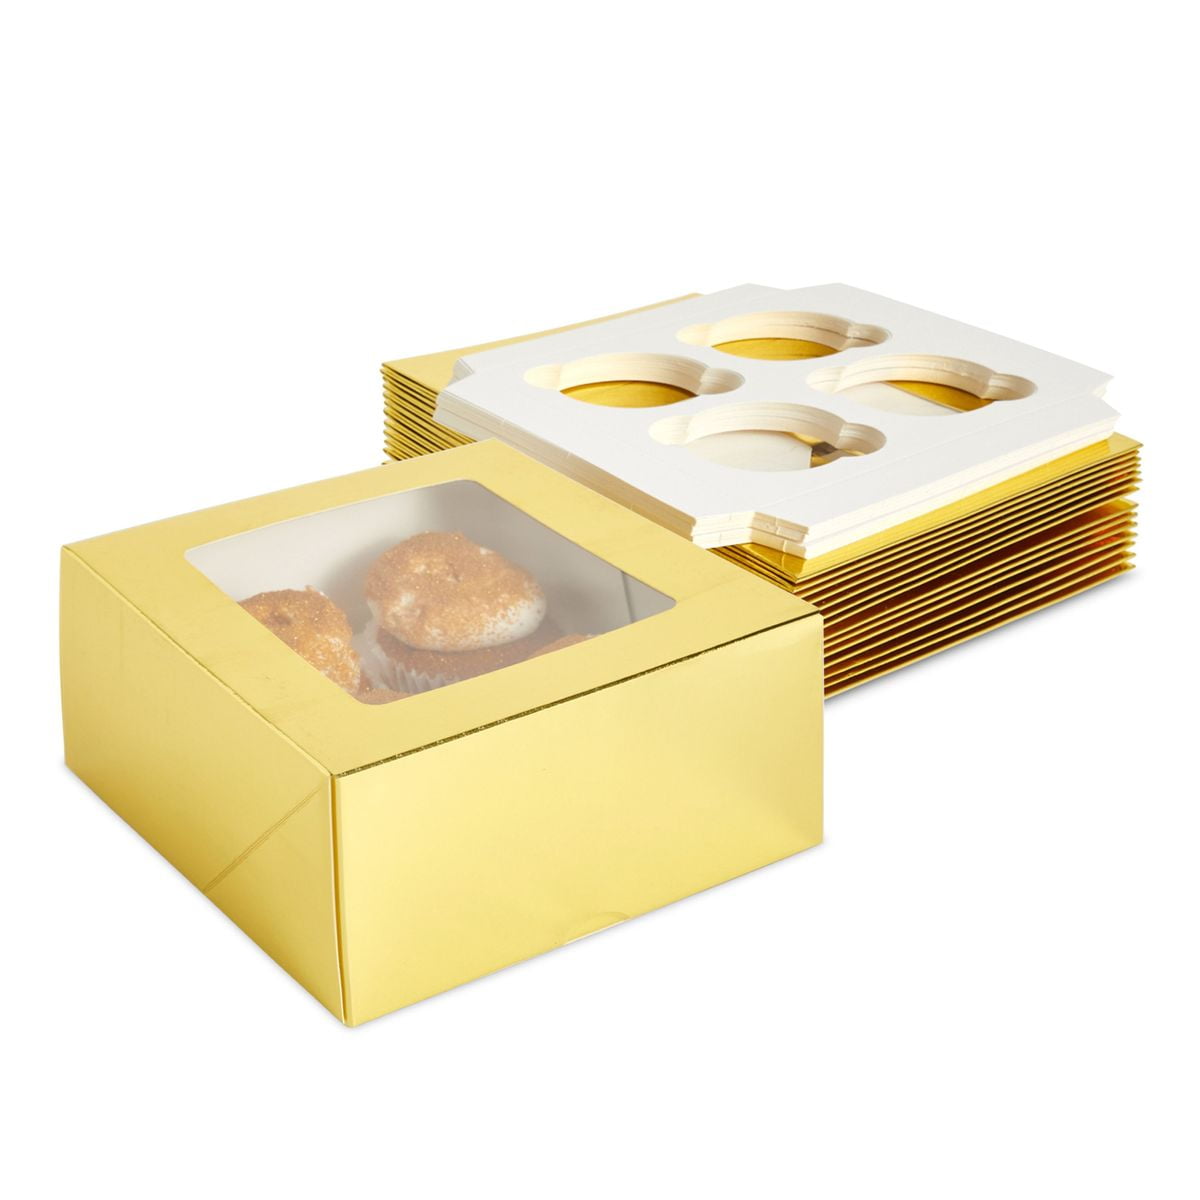 Cupcake Boxes Holds 1 2 4 6 12 Cup Cakes With Removable Trays Cake Box FREE PP 